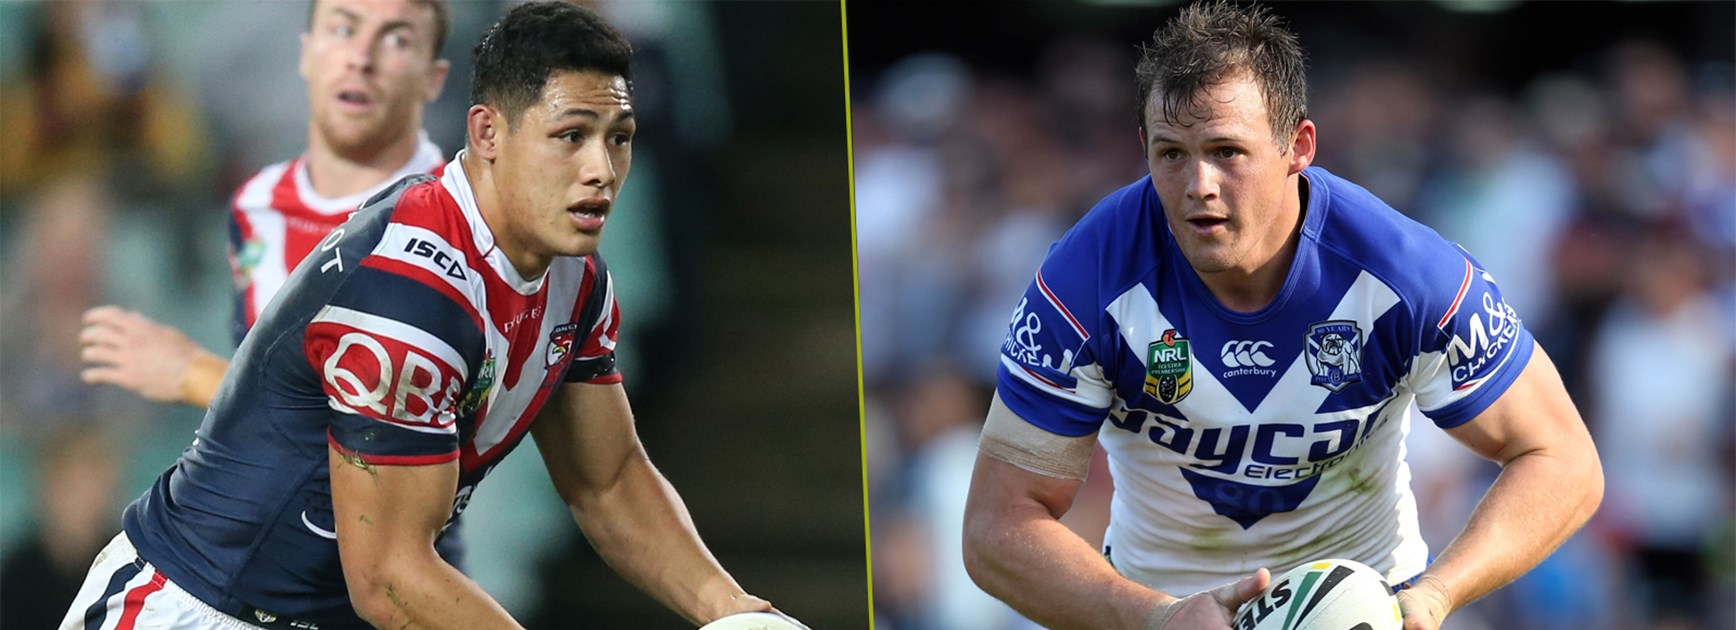 Roger Tuivasa-Sheck and Brett Morris are two ex-wingers who have become star fullbacks this season.